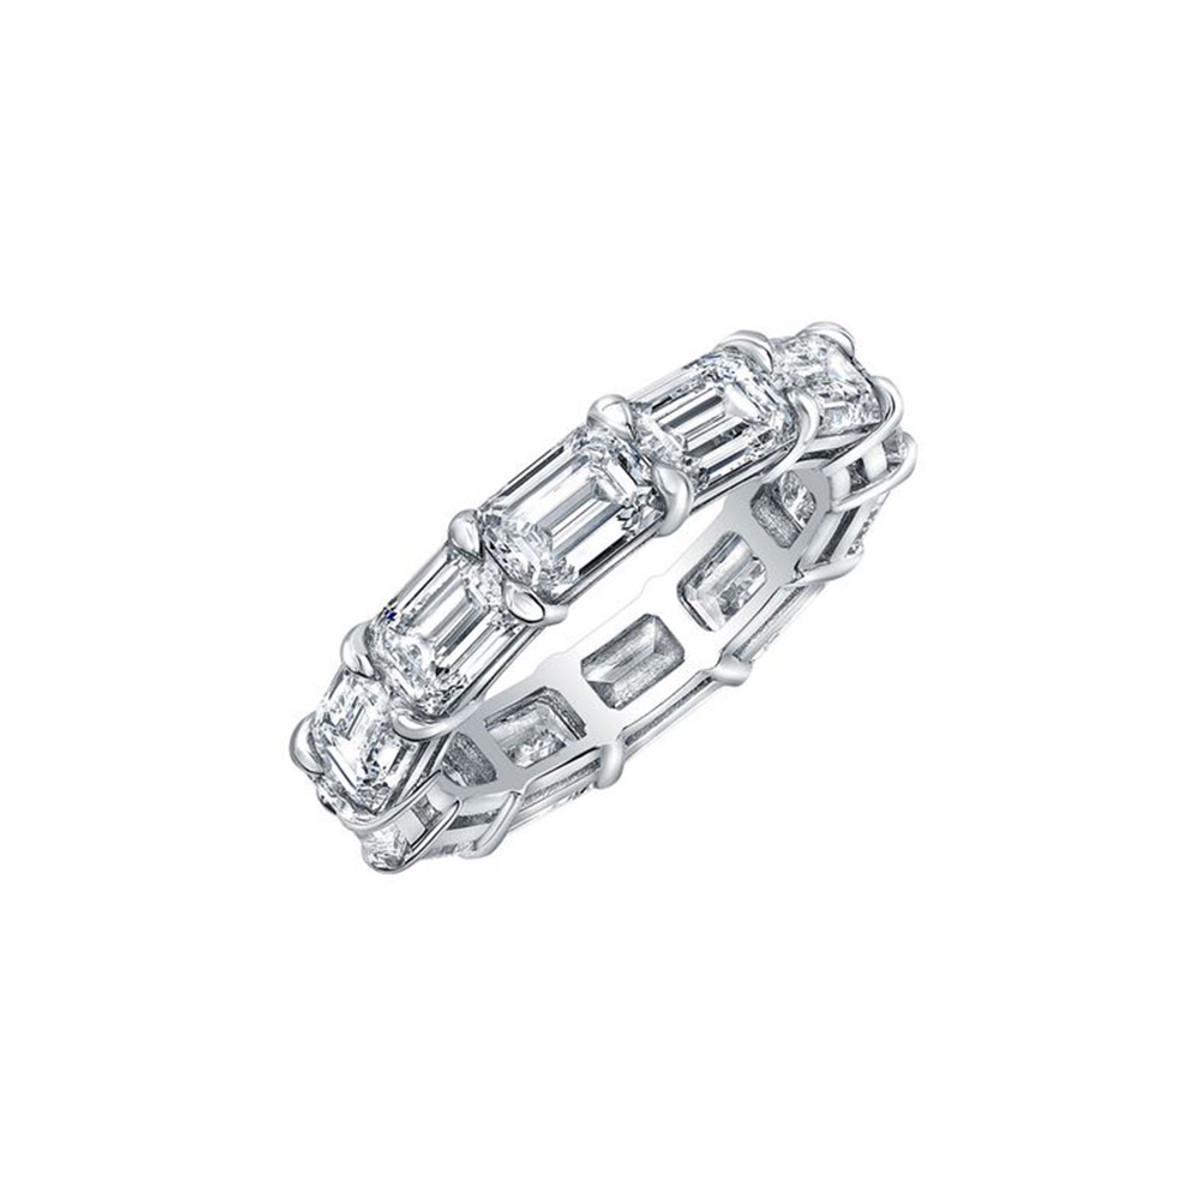 Hyde Park Collection 18K White Gold & Diamond Eternity Ring-DANVB7935 Product Image